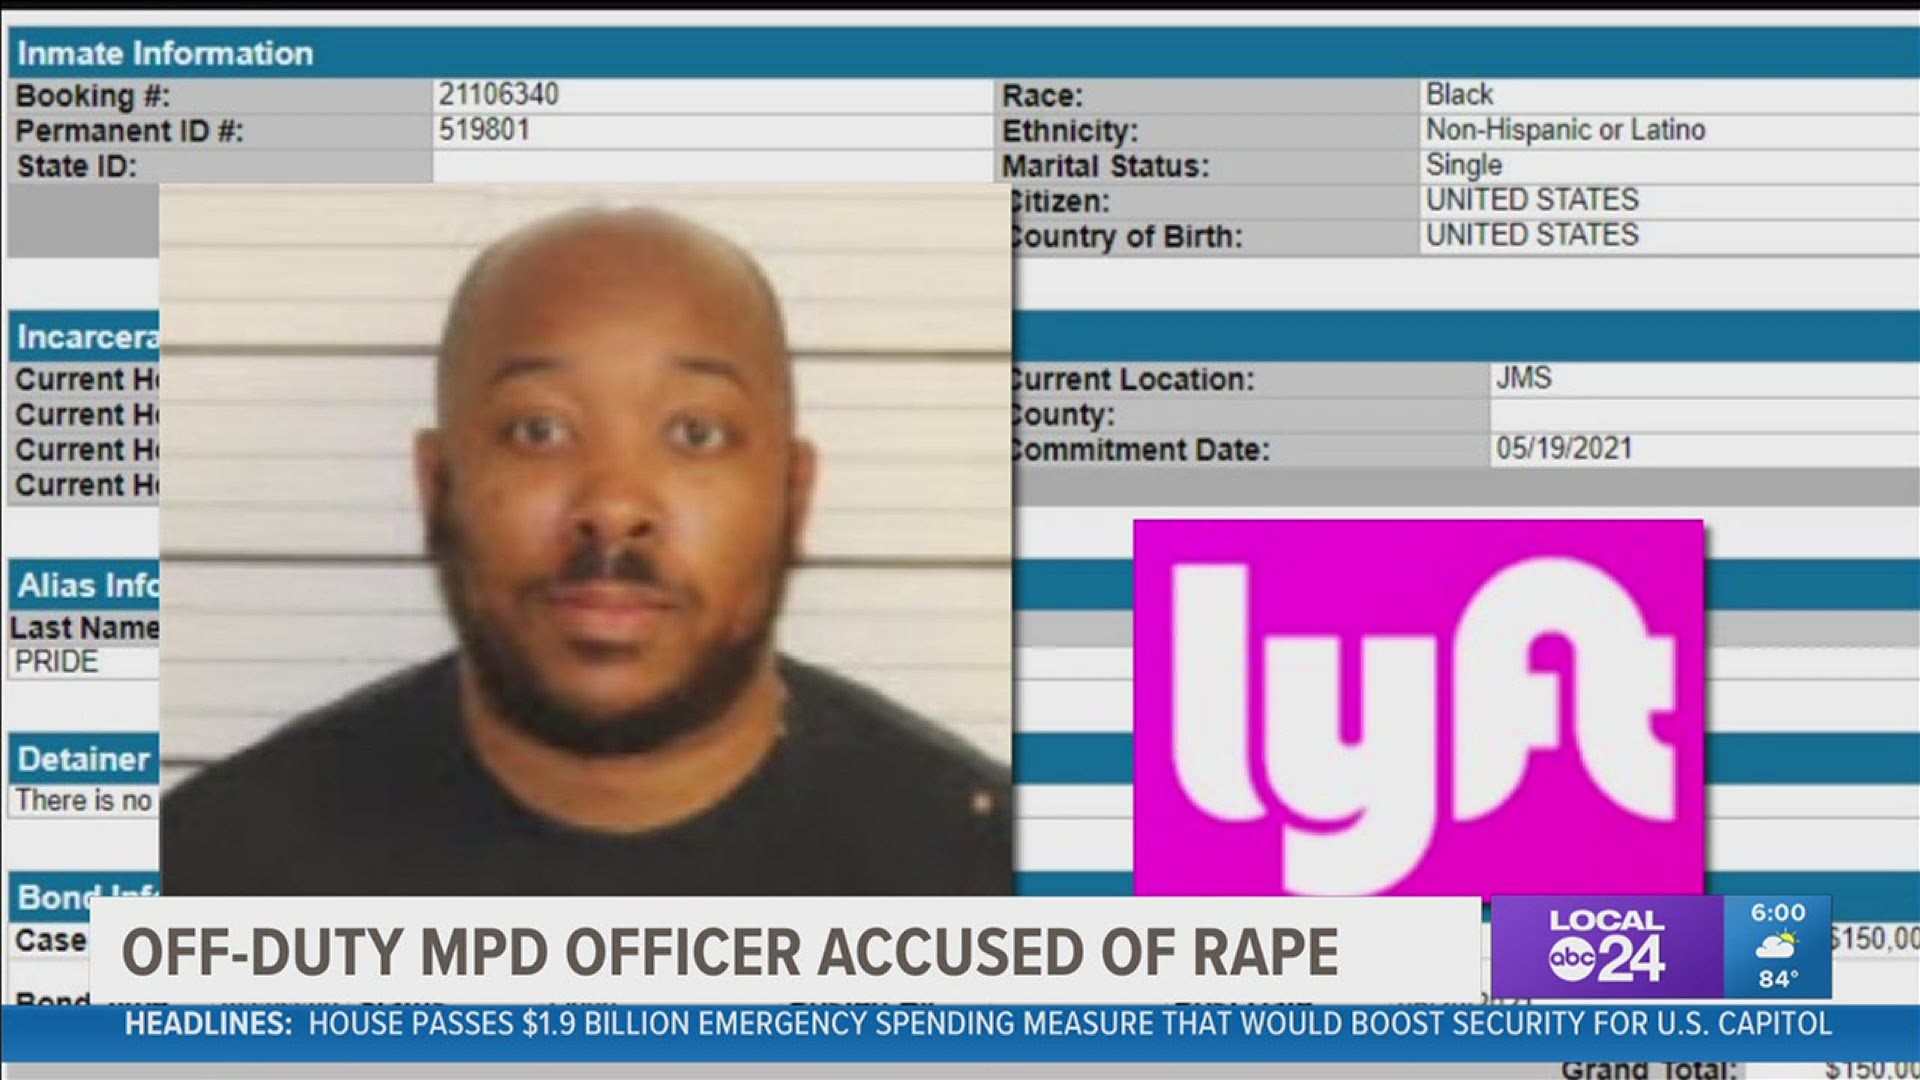 According to court records, investigators were able to use the information from the Lyft app to identify Travis Pride as the suspect.